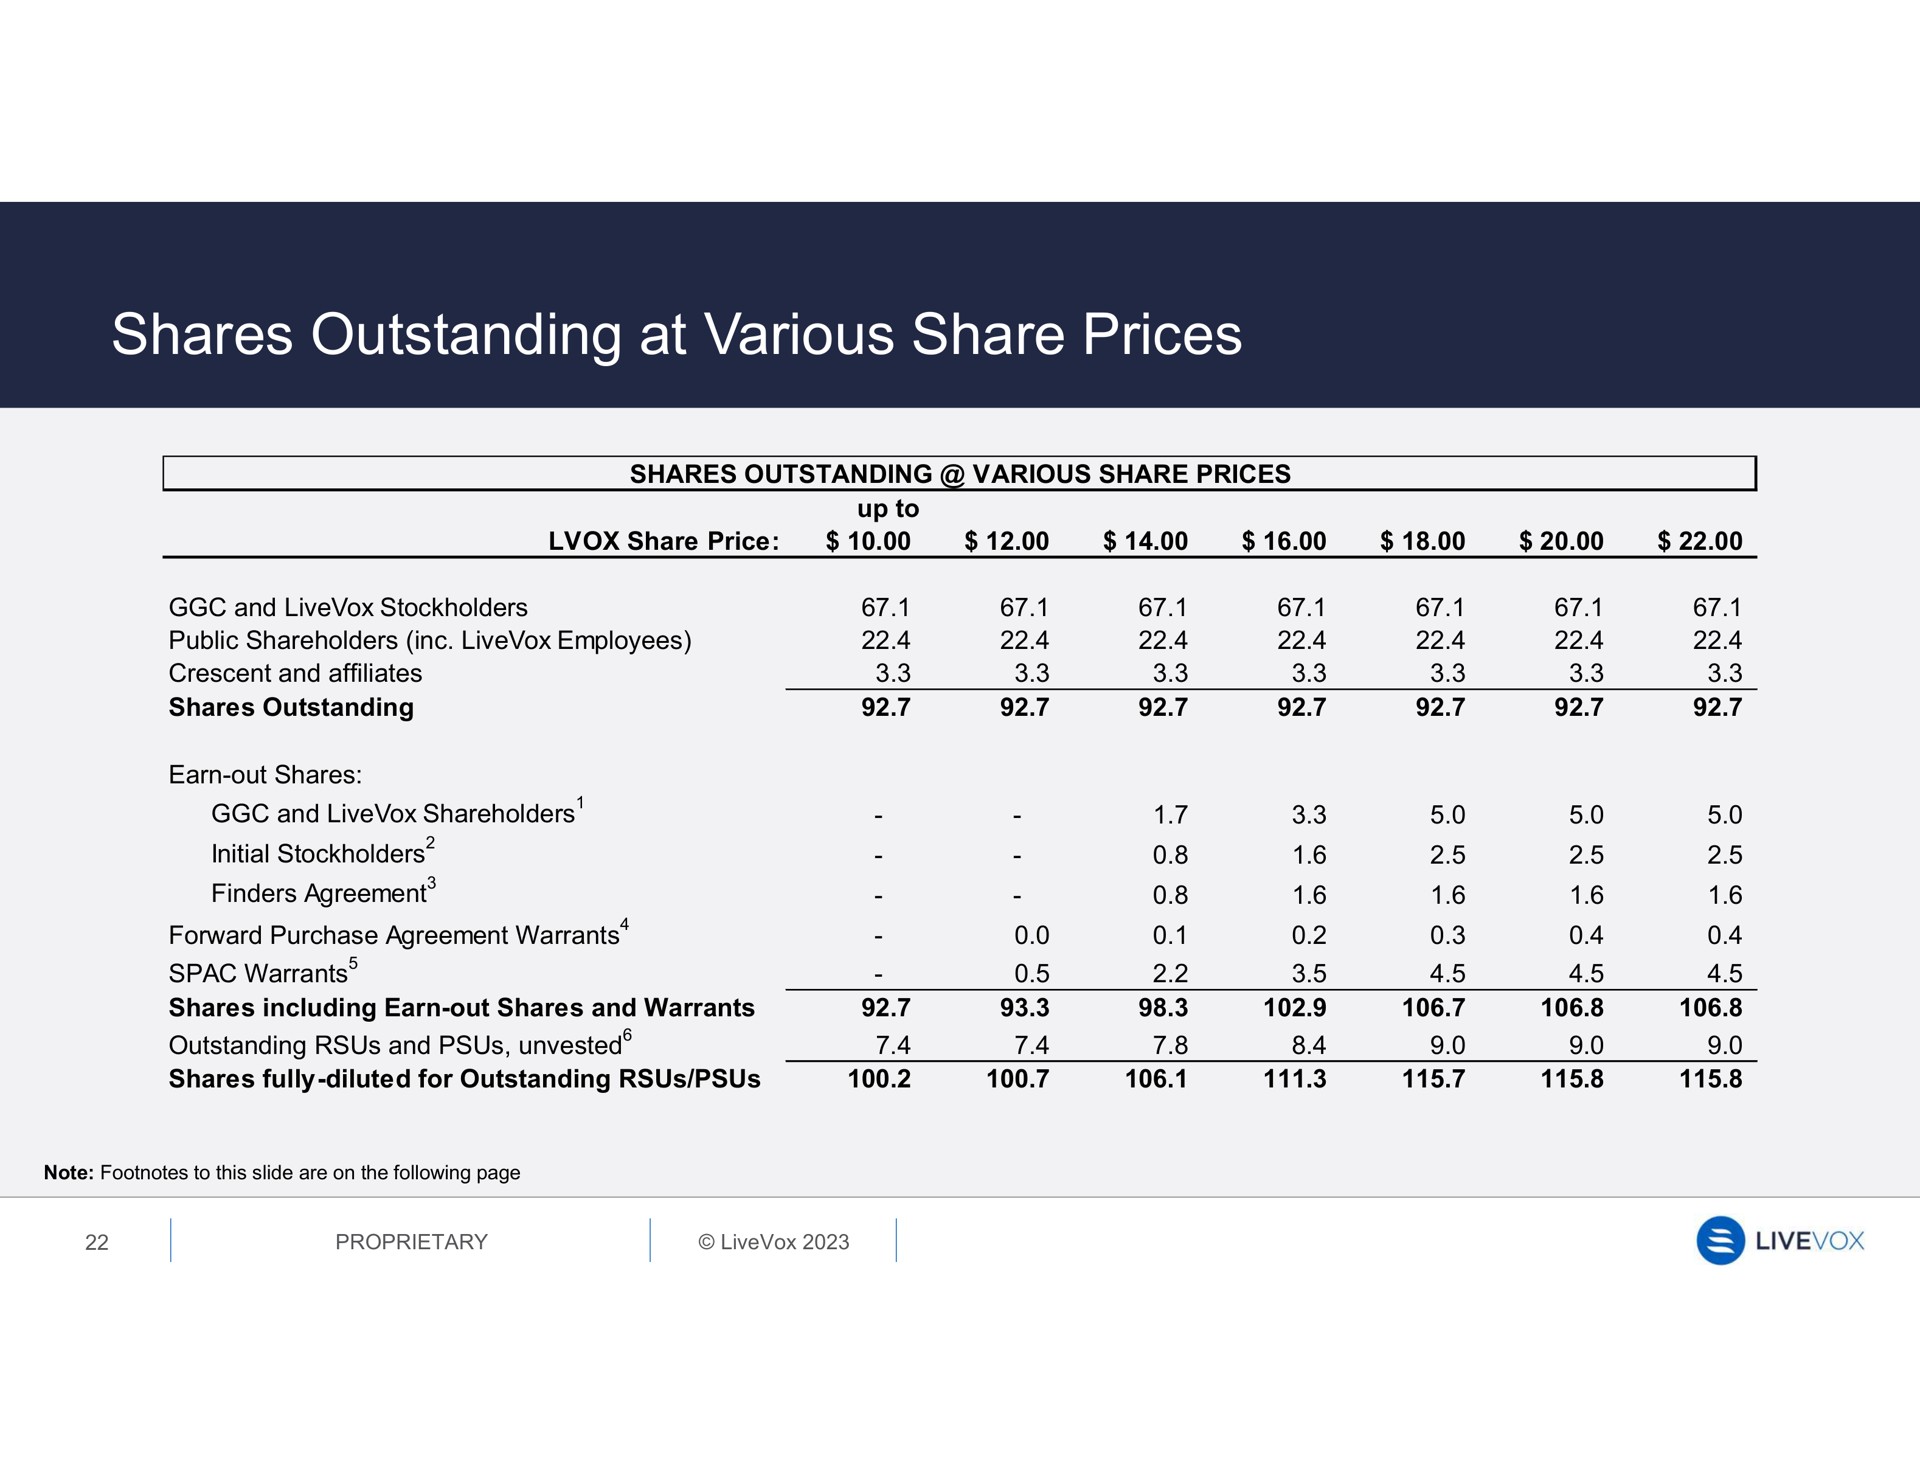 shares outstanding at various share prices and shareholders finders agreement warrants | LiveVox